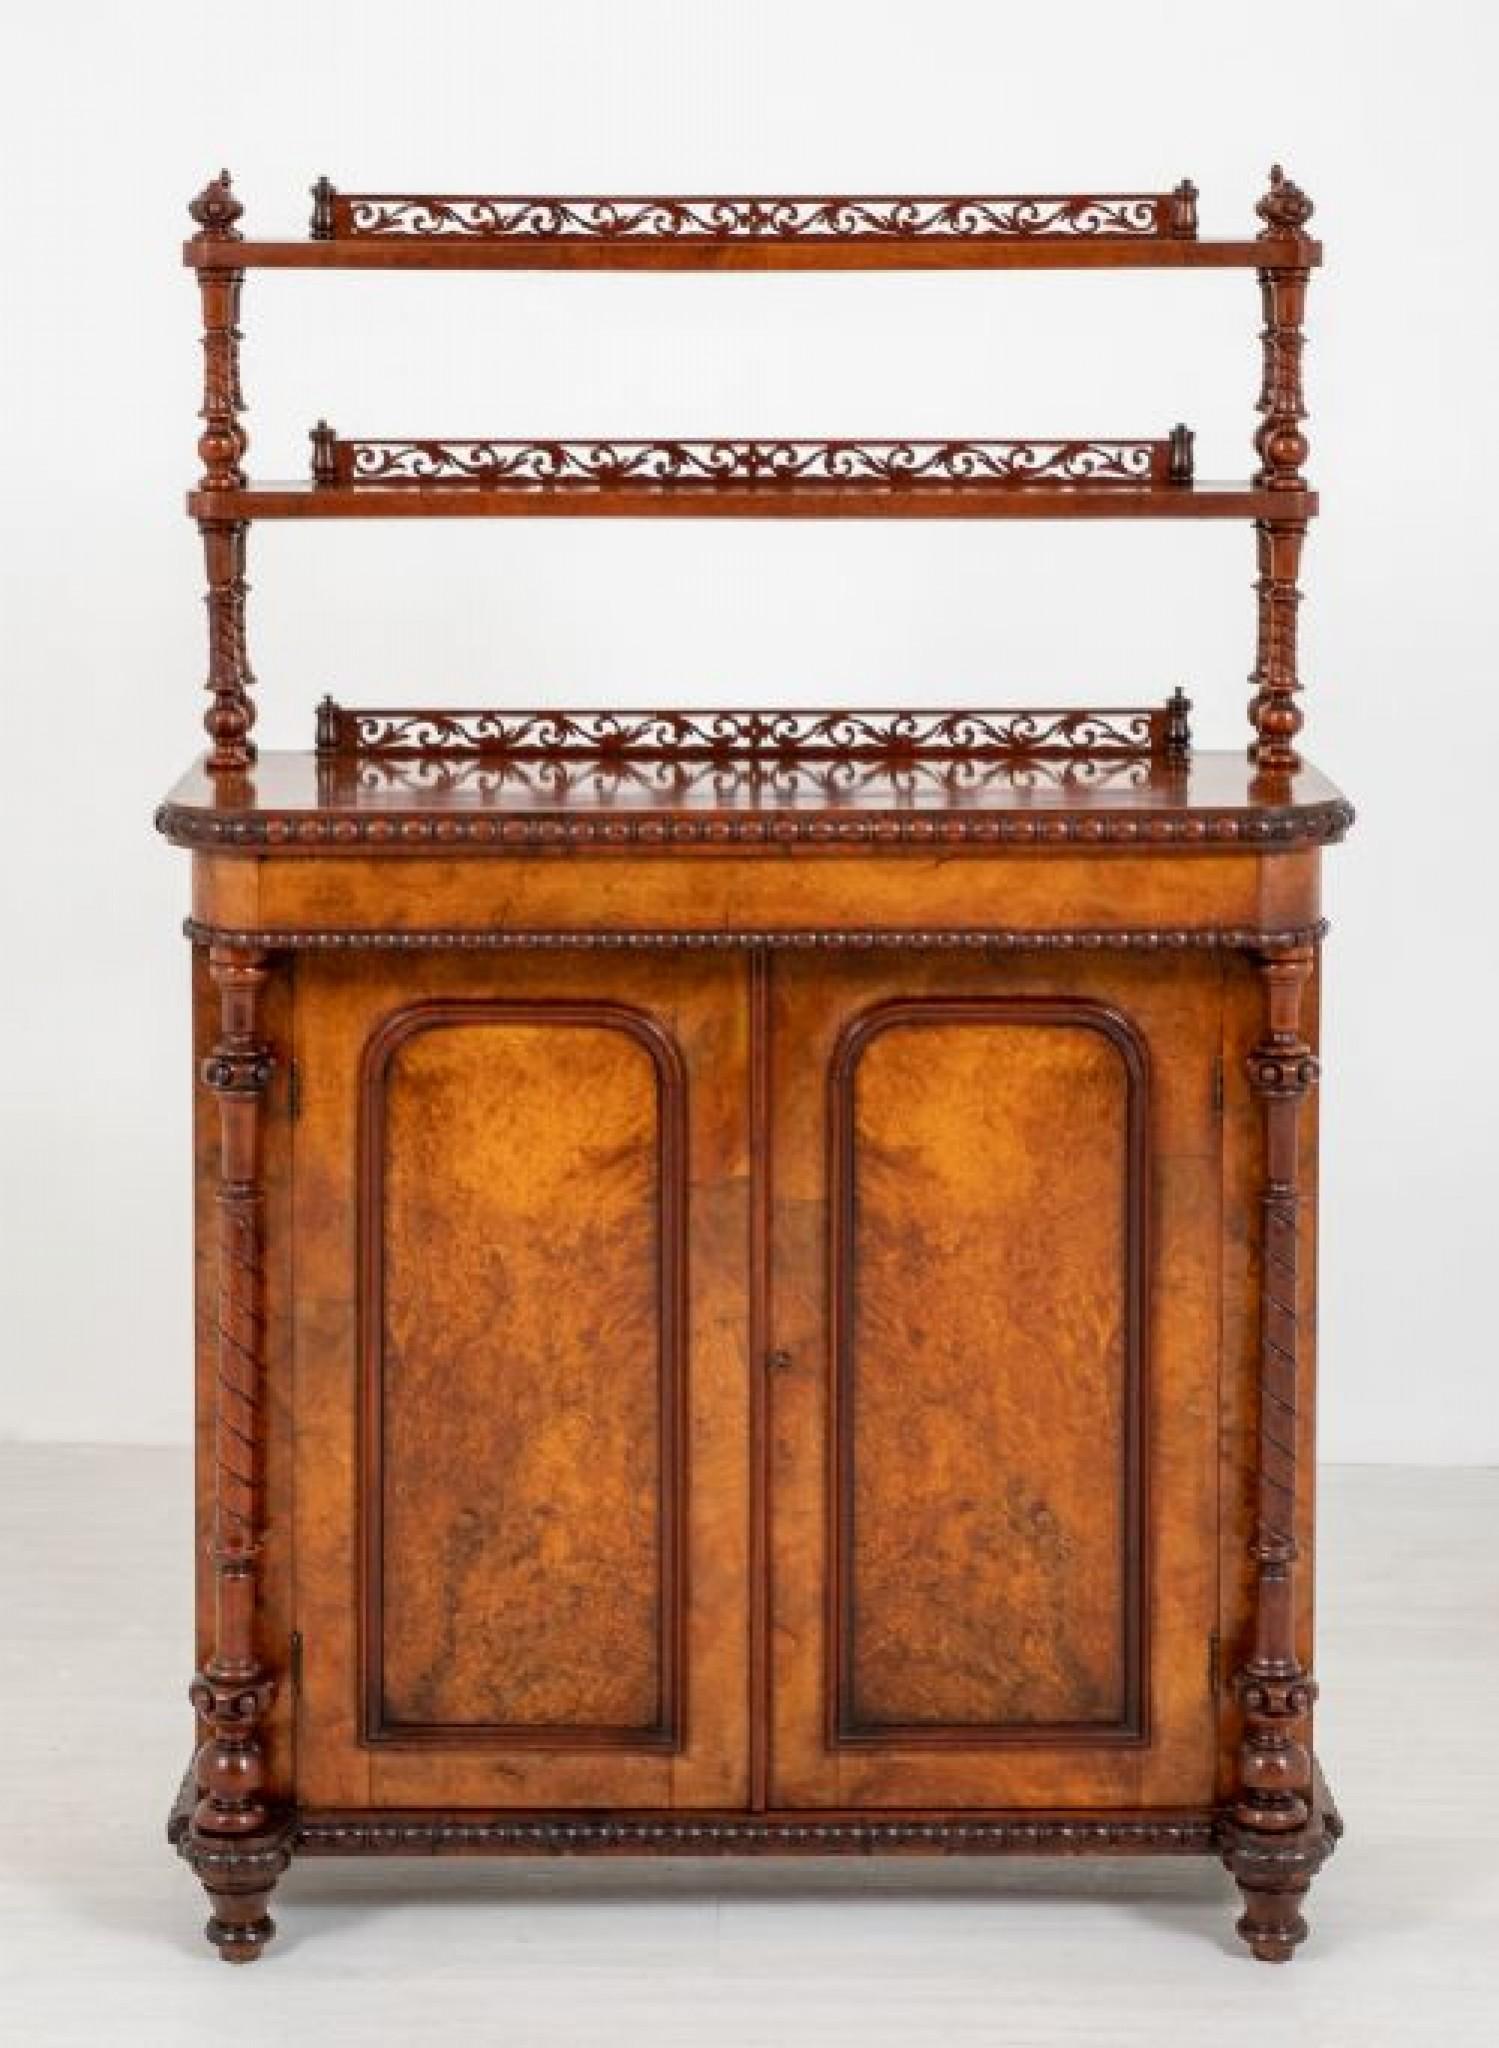 Pretty Victorian Burr walnut chiffonier.
This Elegant Chiffonier Stands Upon Turned Feet.
Having 2 Doors with Wonderful Burr Walnut Veneers Flanked by Turned and Carved Columns.
circa 1850
The Mouldings on the Chiffonier are of a half turned